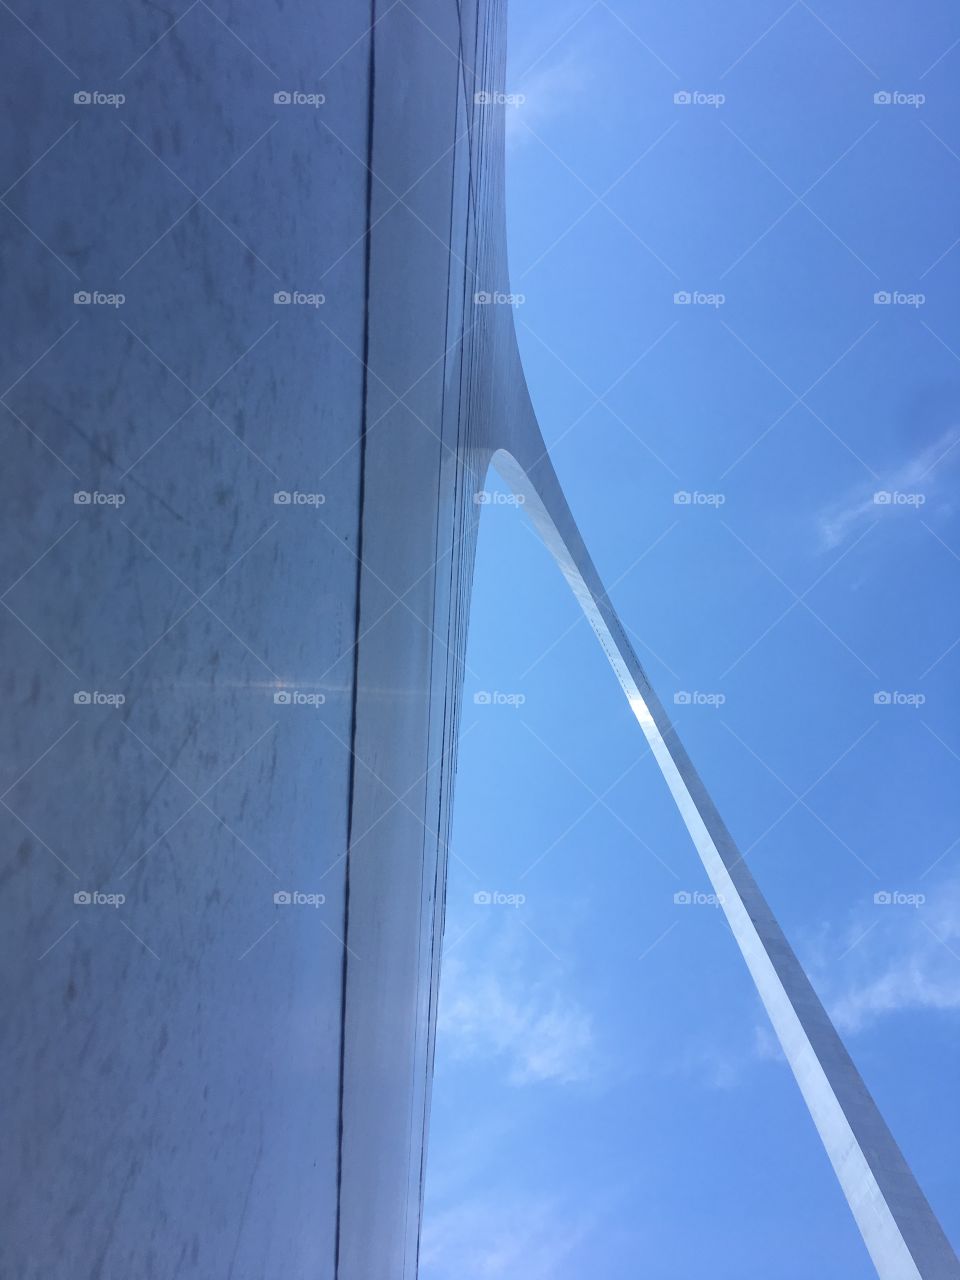 Rarely snapped view of the world famous St Louis Arch